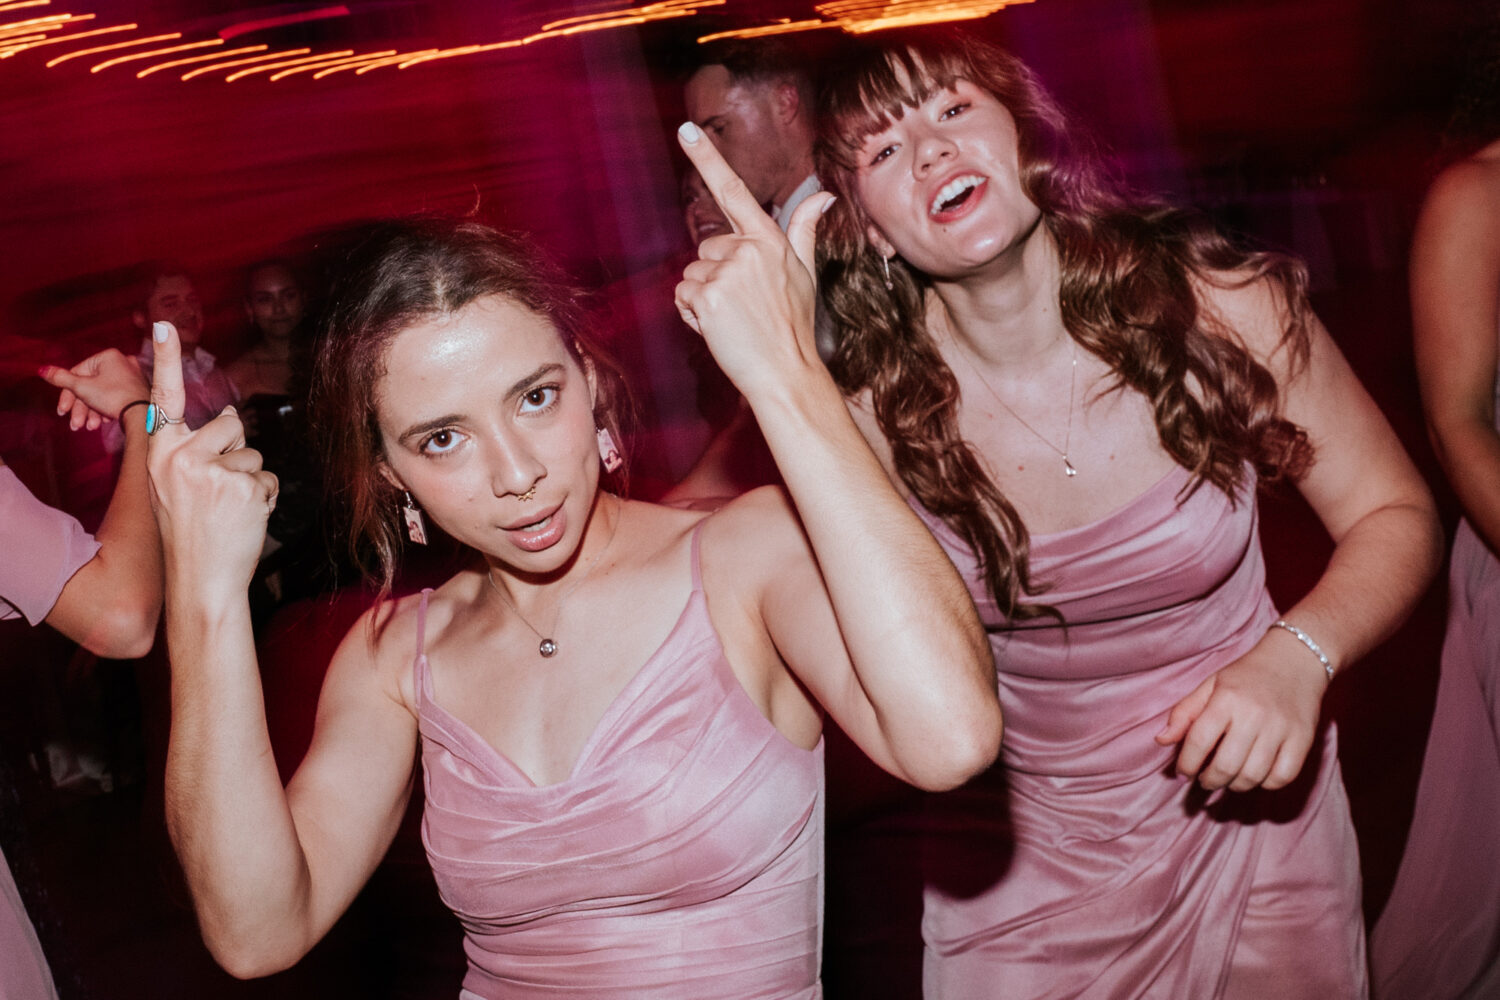 bridesmaids having fun on the dance floor together